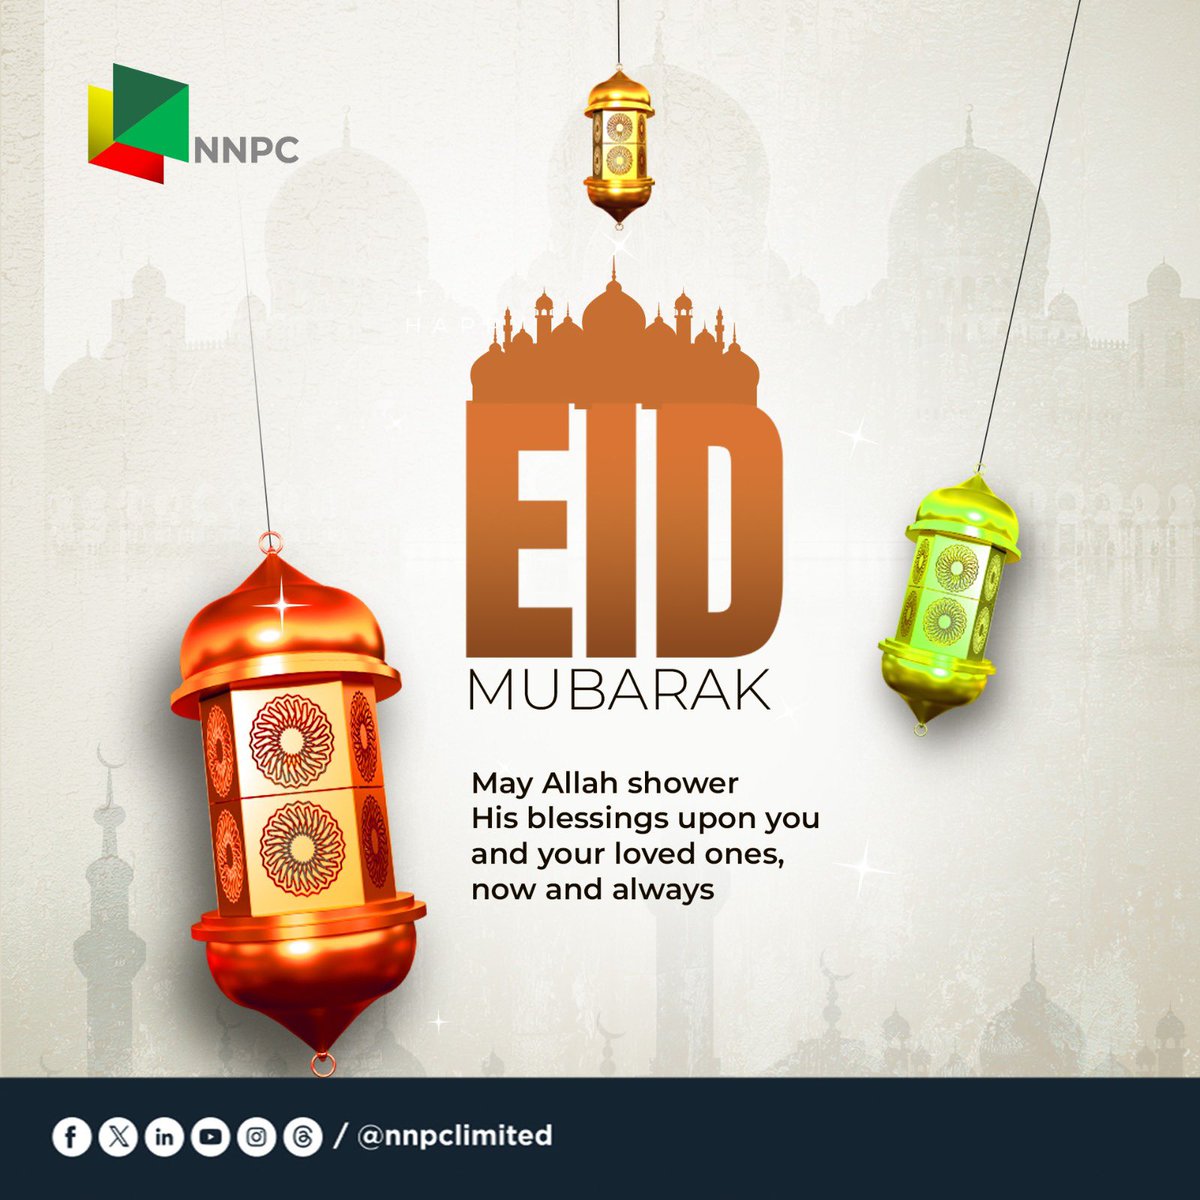 NNPC Ltd. wishes everyone a joyous and blessed Eid al-Fitr! May the lessons learnt in the Holy Month of Ramadan be a source of happiness, peace, and prosperity to you and your loved ones. Eid Mubarak! #EidMubarak #EnergyforToday #EnergyforTomorrow